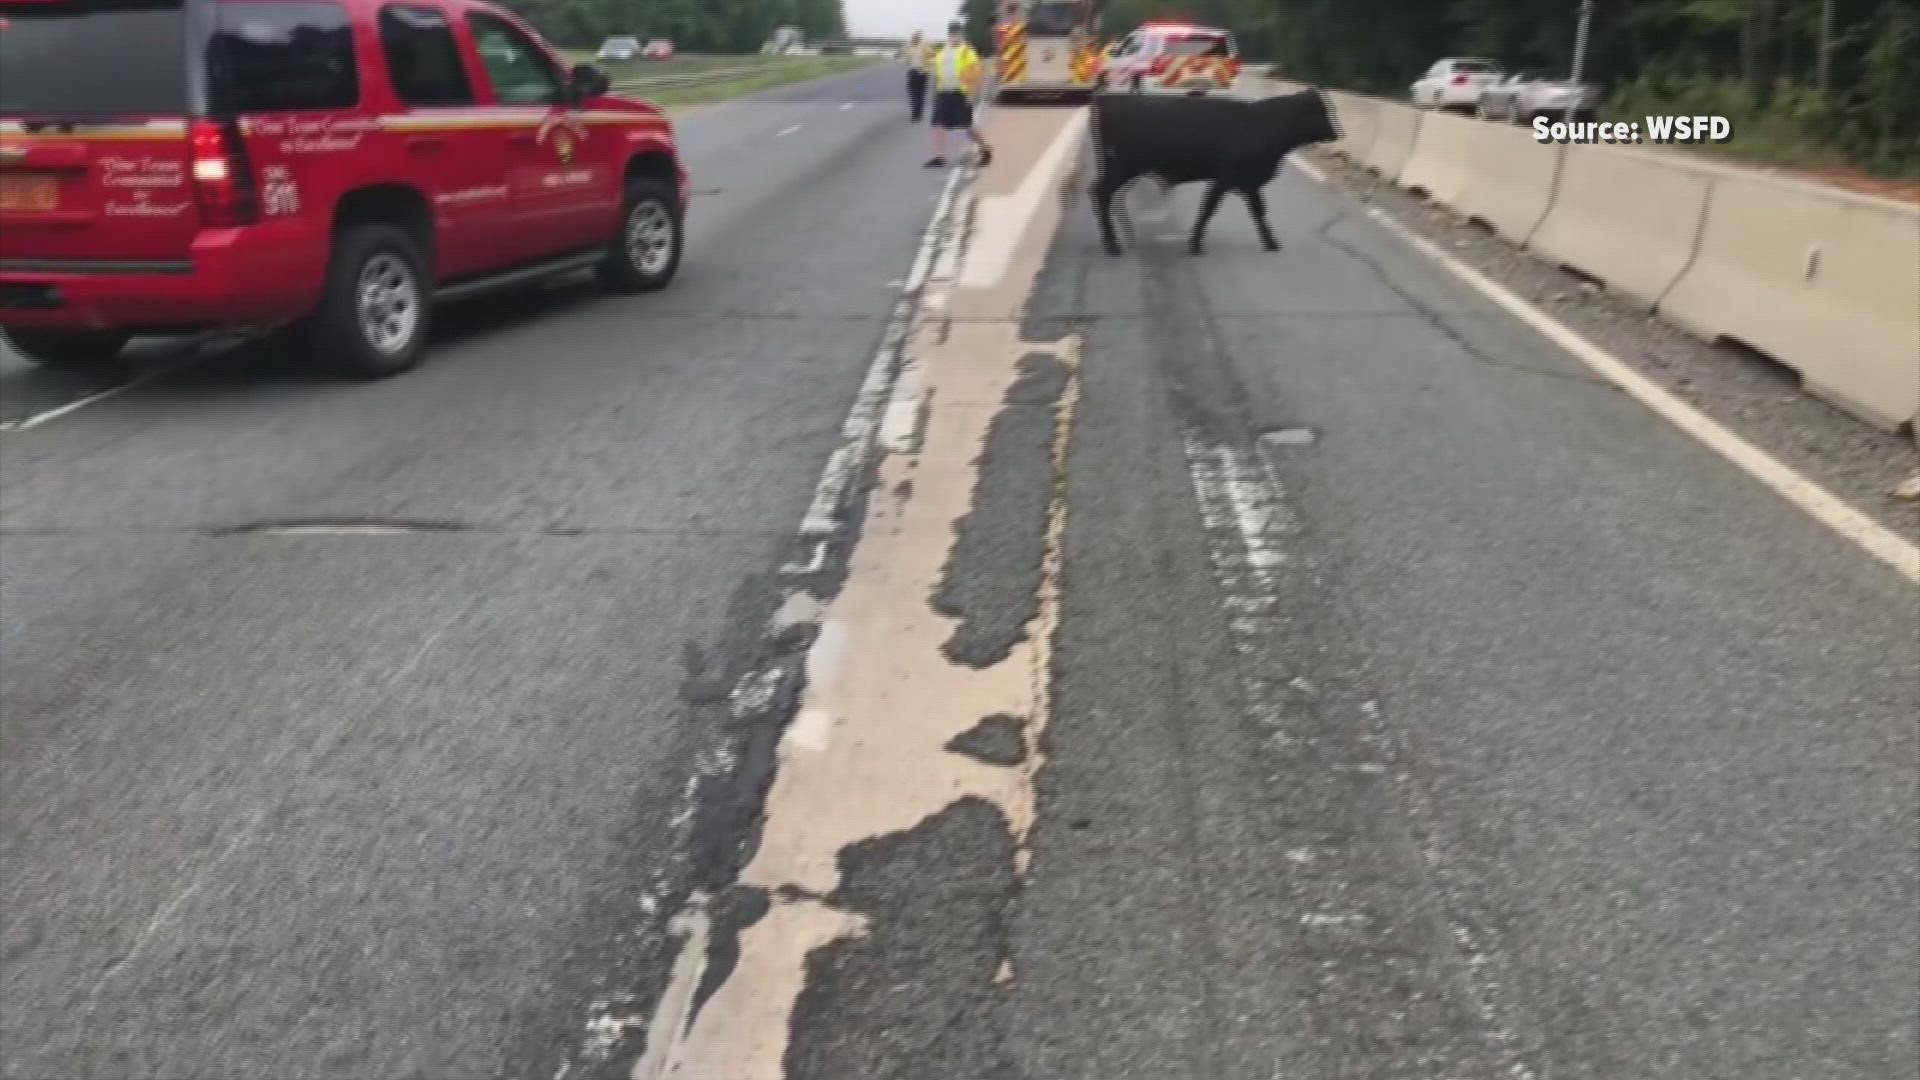 Winston-Salem firefighters got a unique call on Wednesday. They had to wrangle a bull off the highway!